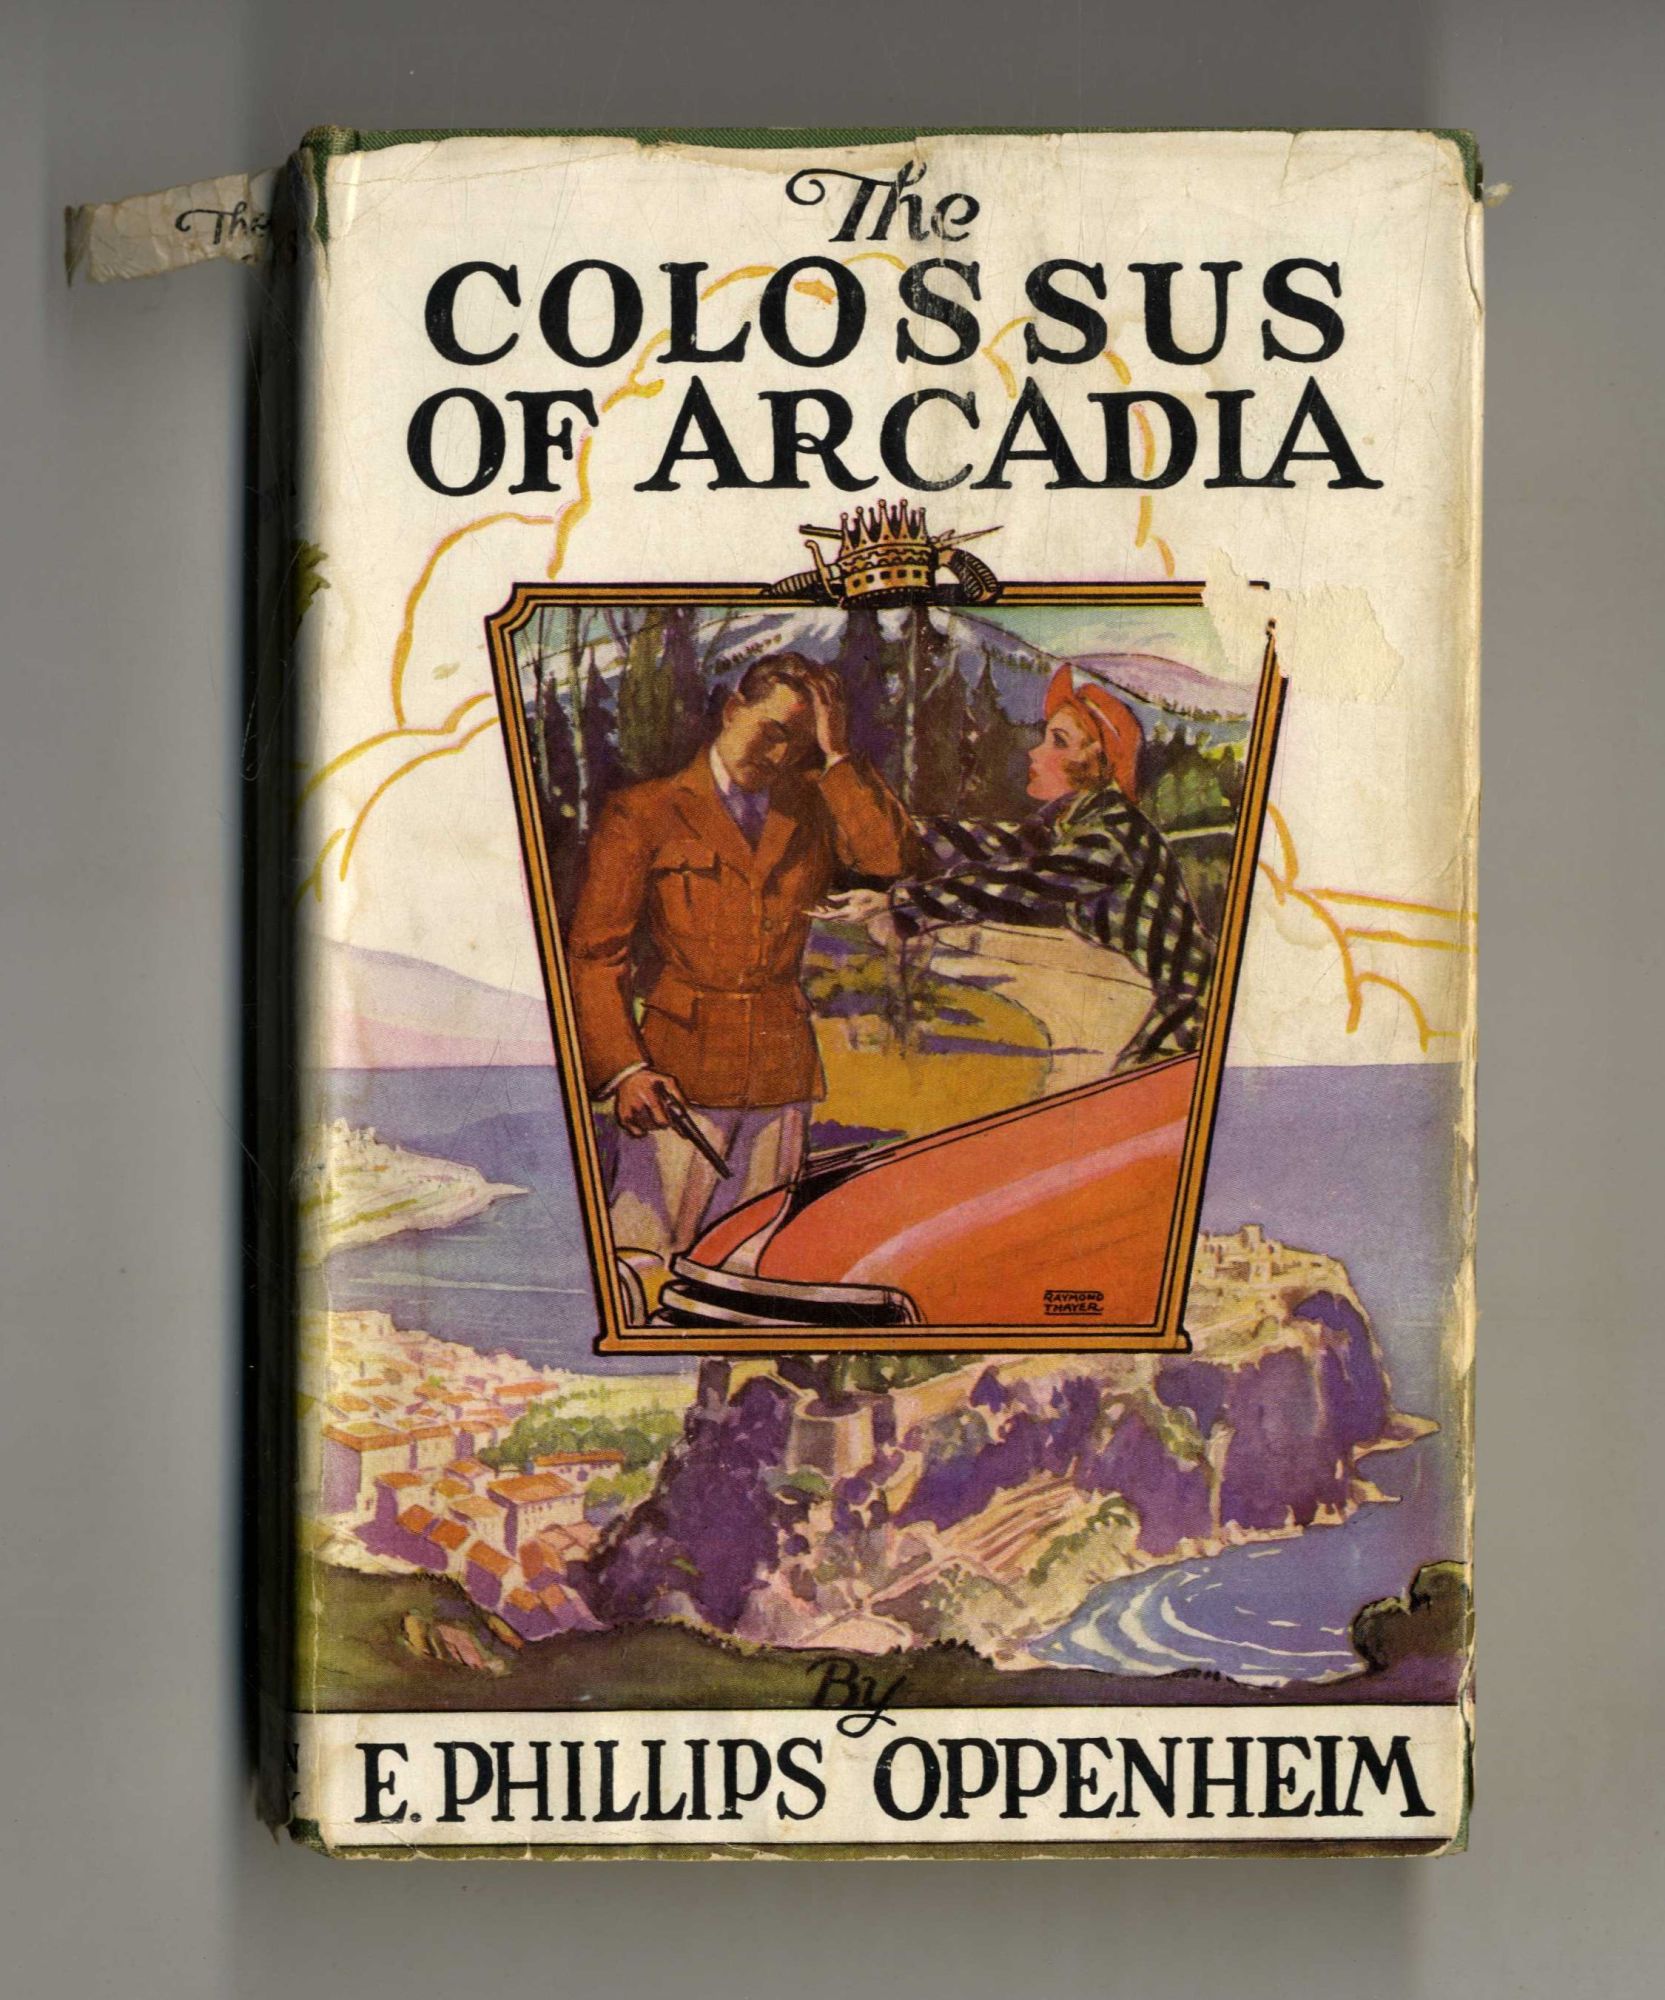 Book #160259 The Colossus of Arcadia 1st Edition/1st Printing. E. Phillips Oppenheim.